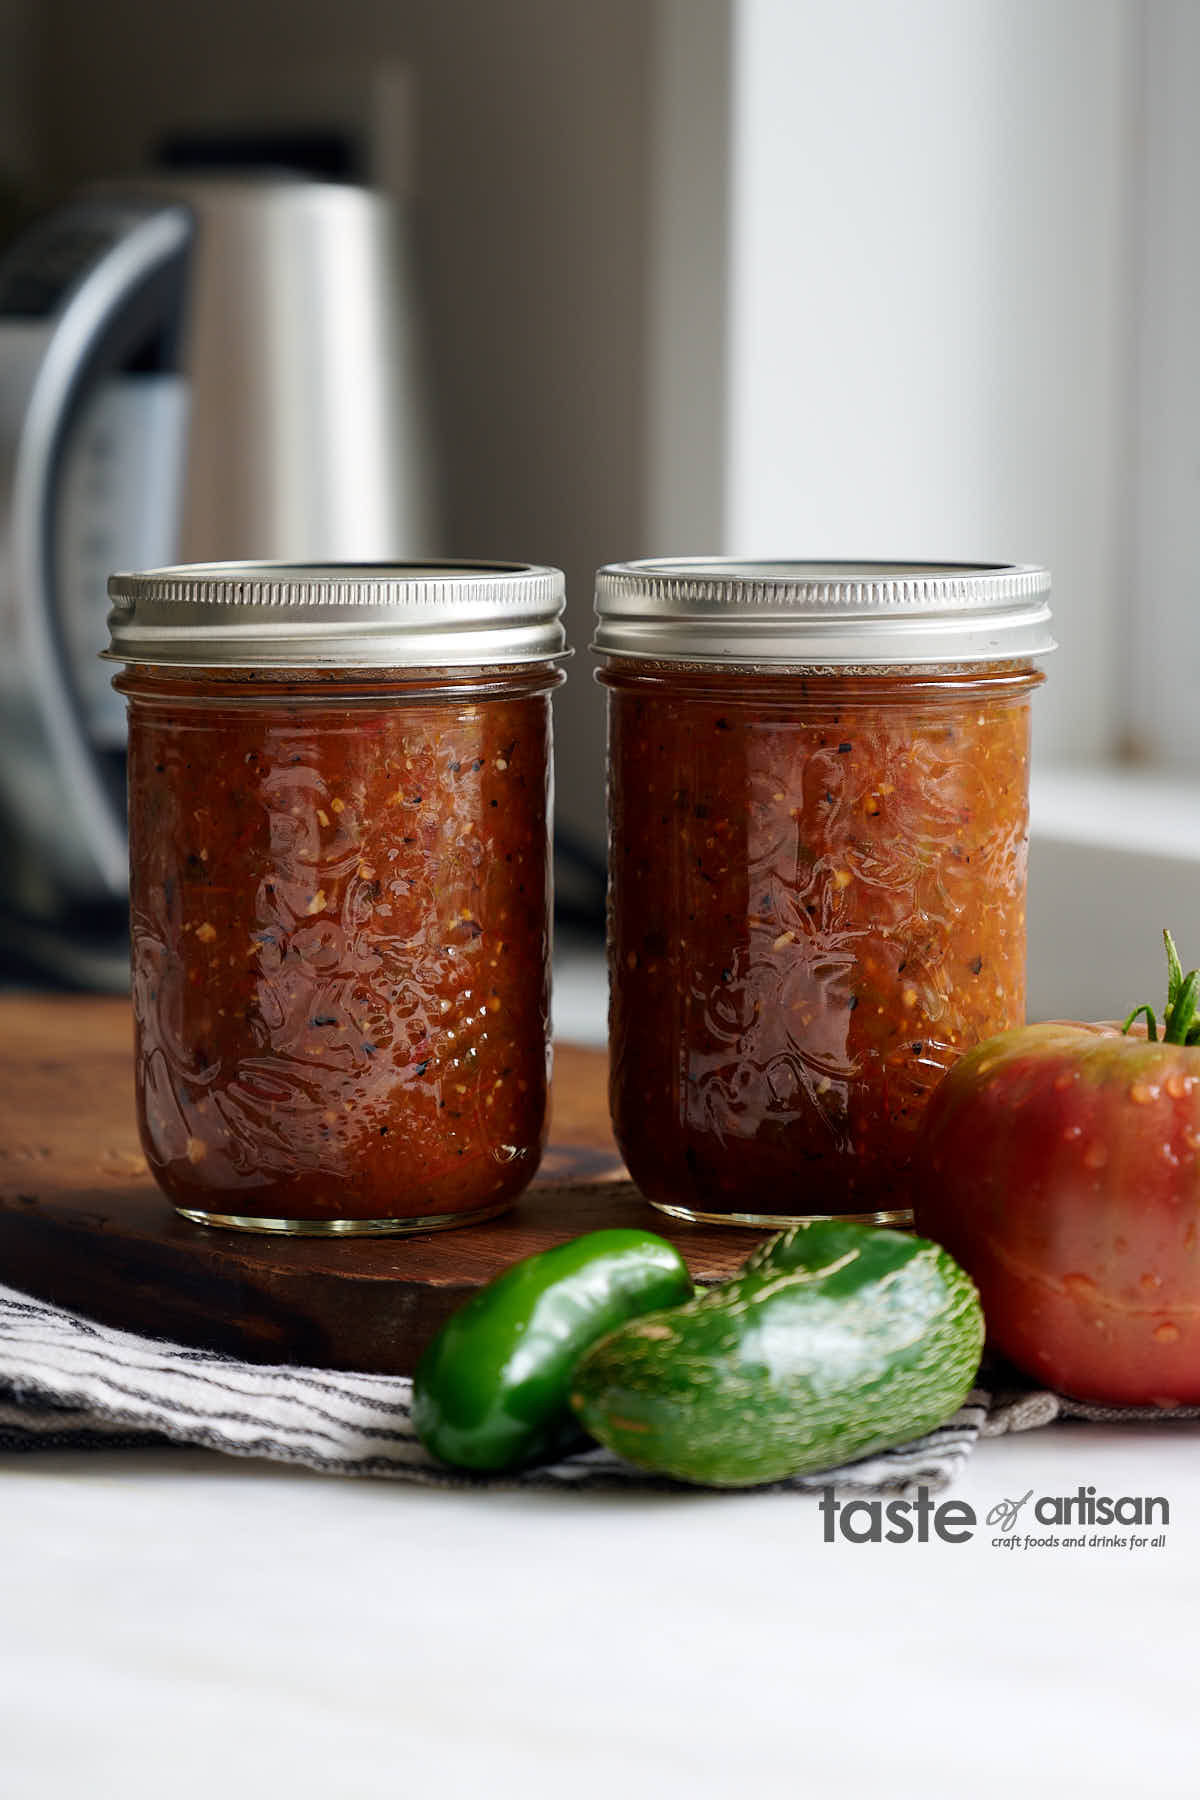 Recipe for the most delicious charred, smoky slasa roja (red salsa). Made with heirloom tomatoes, poblano and jalapeno peppers.